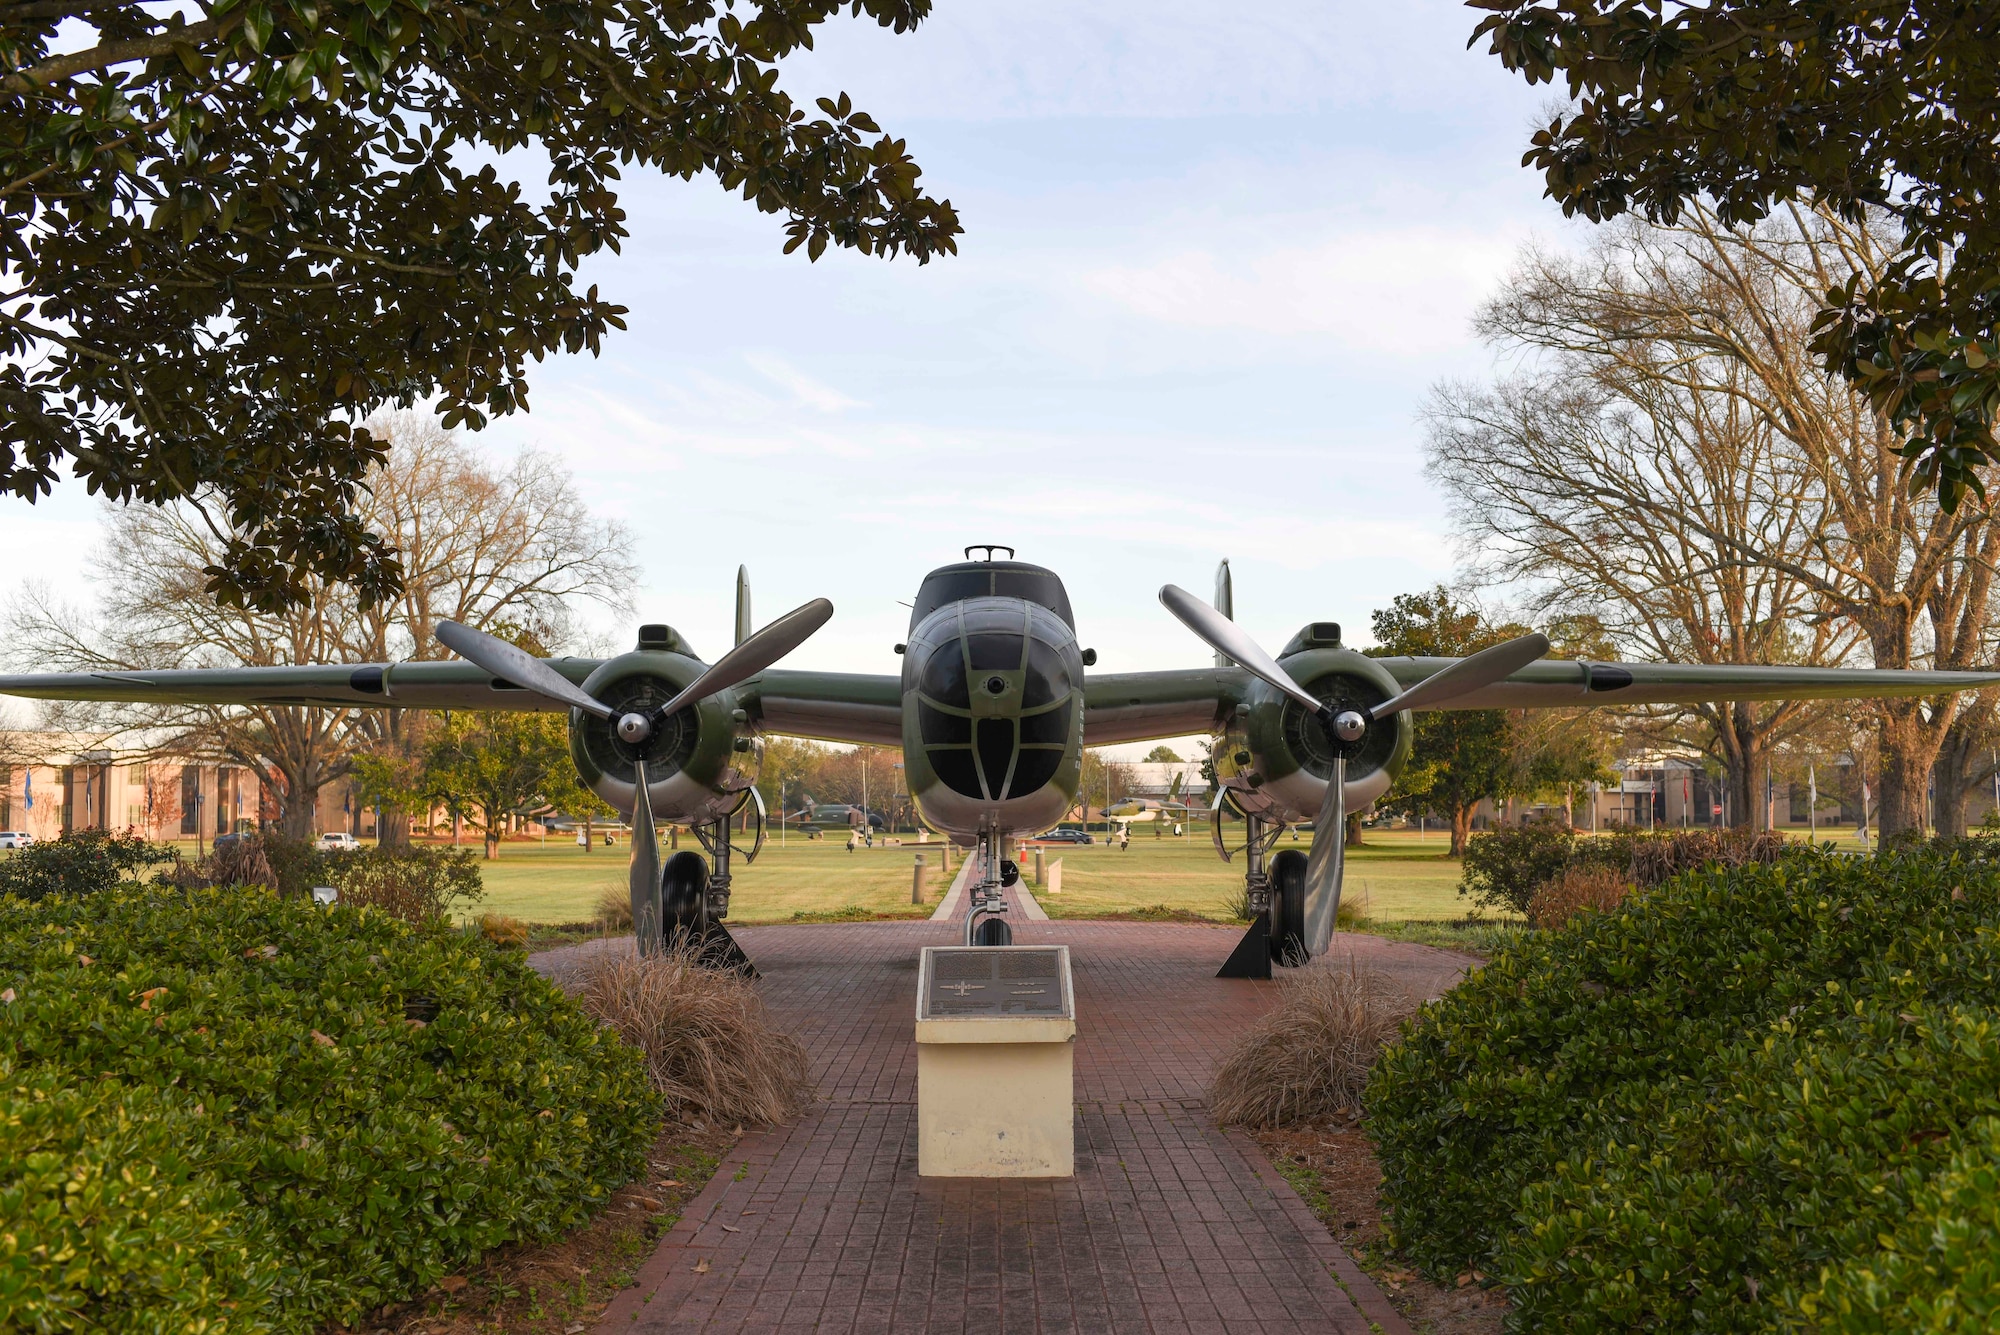 A B-26 Mitchell sits on display February 3, 2020, at Maxwell Air Force Base, Alabama.